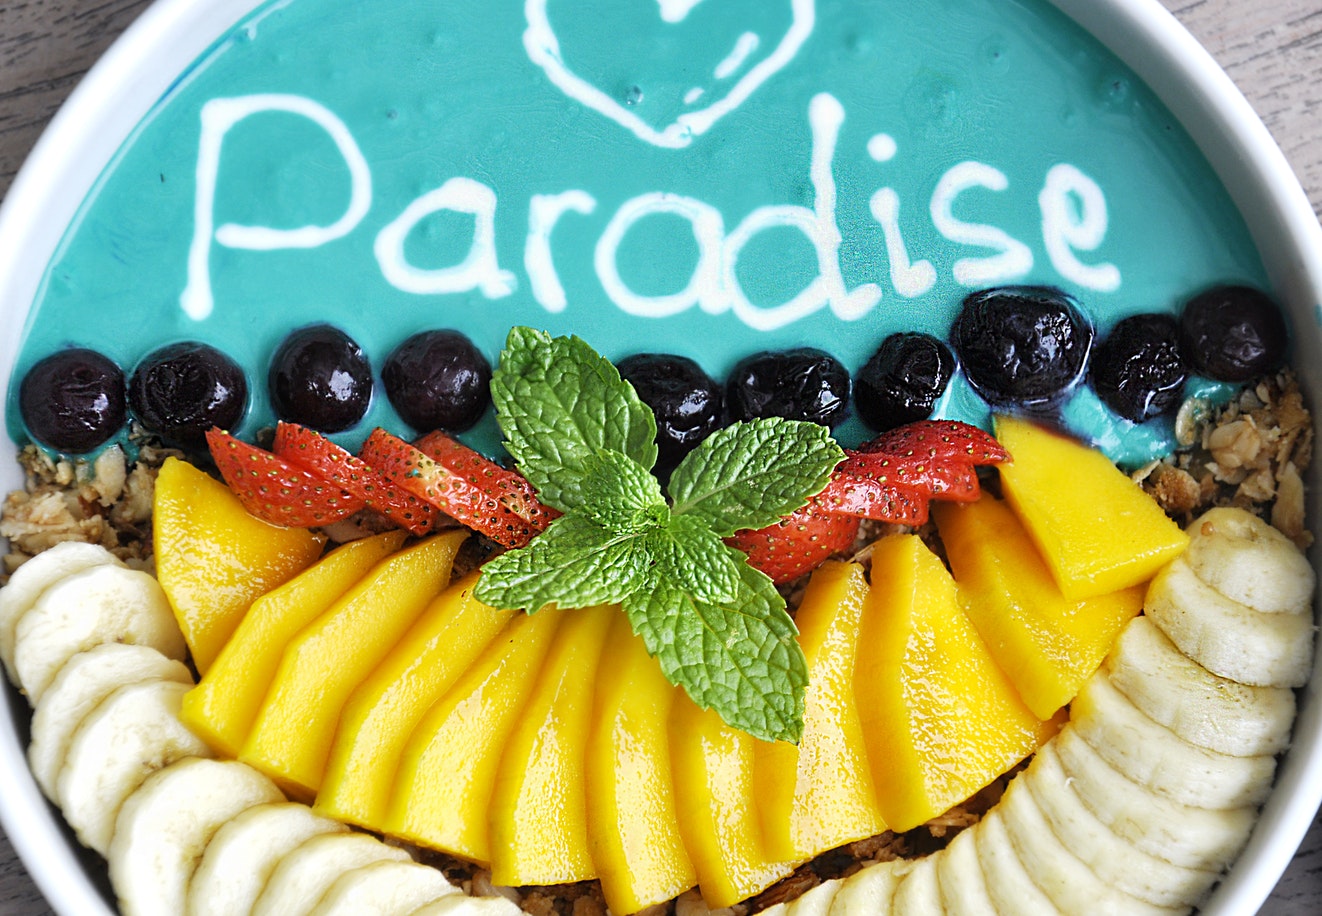 Let Your Taste Buds Take You to Paradise